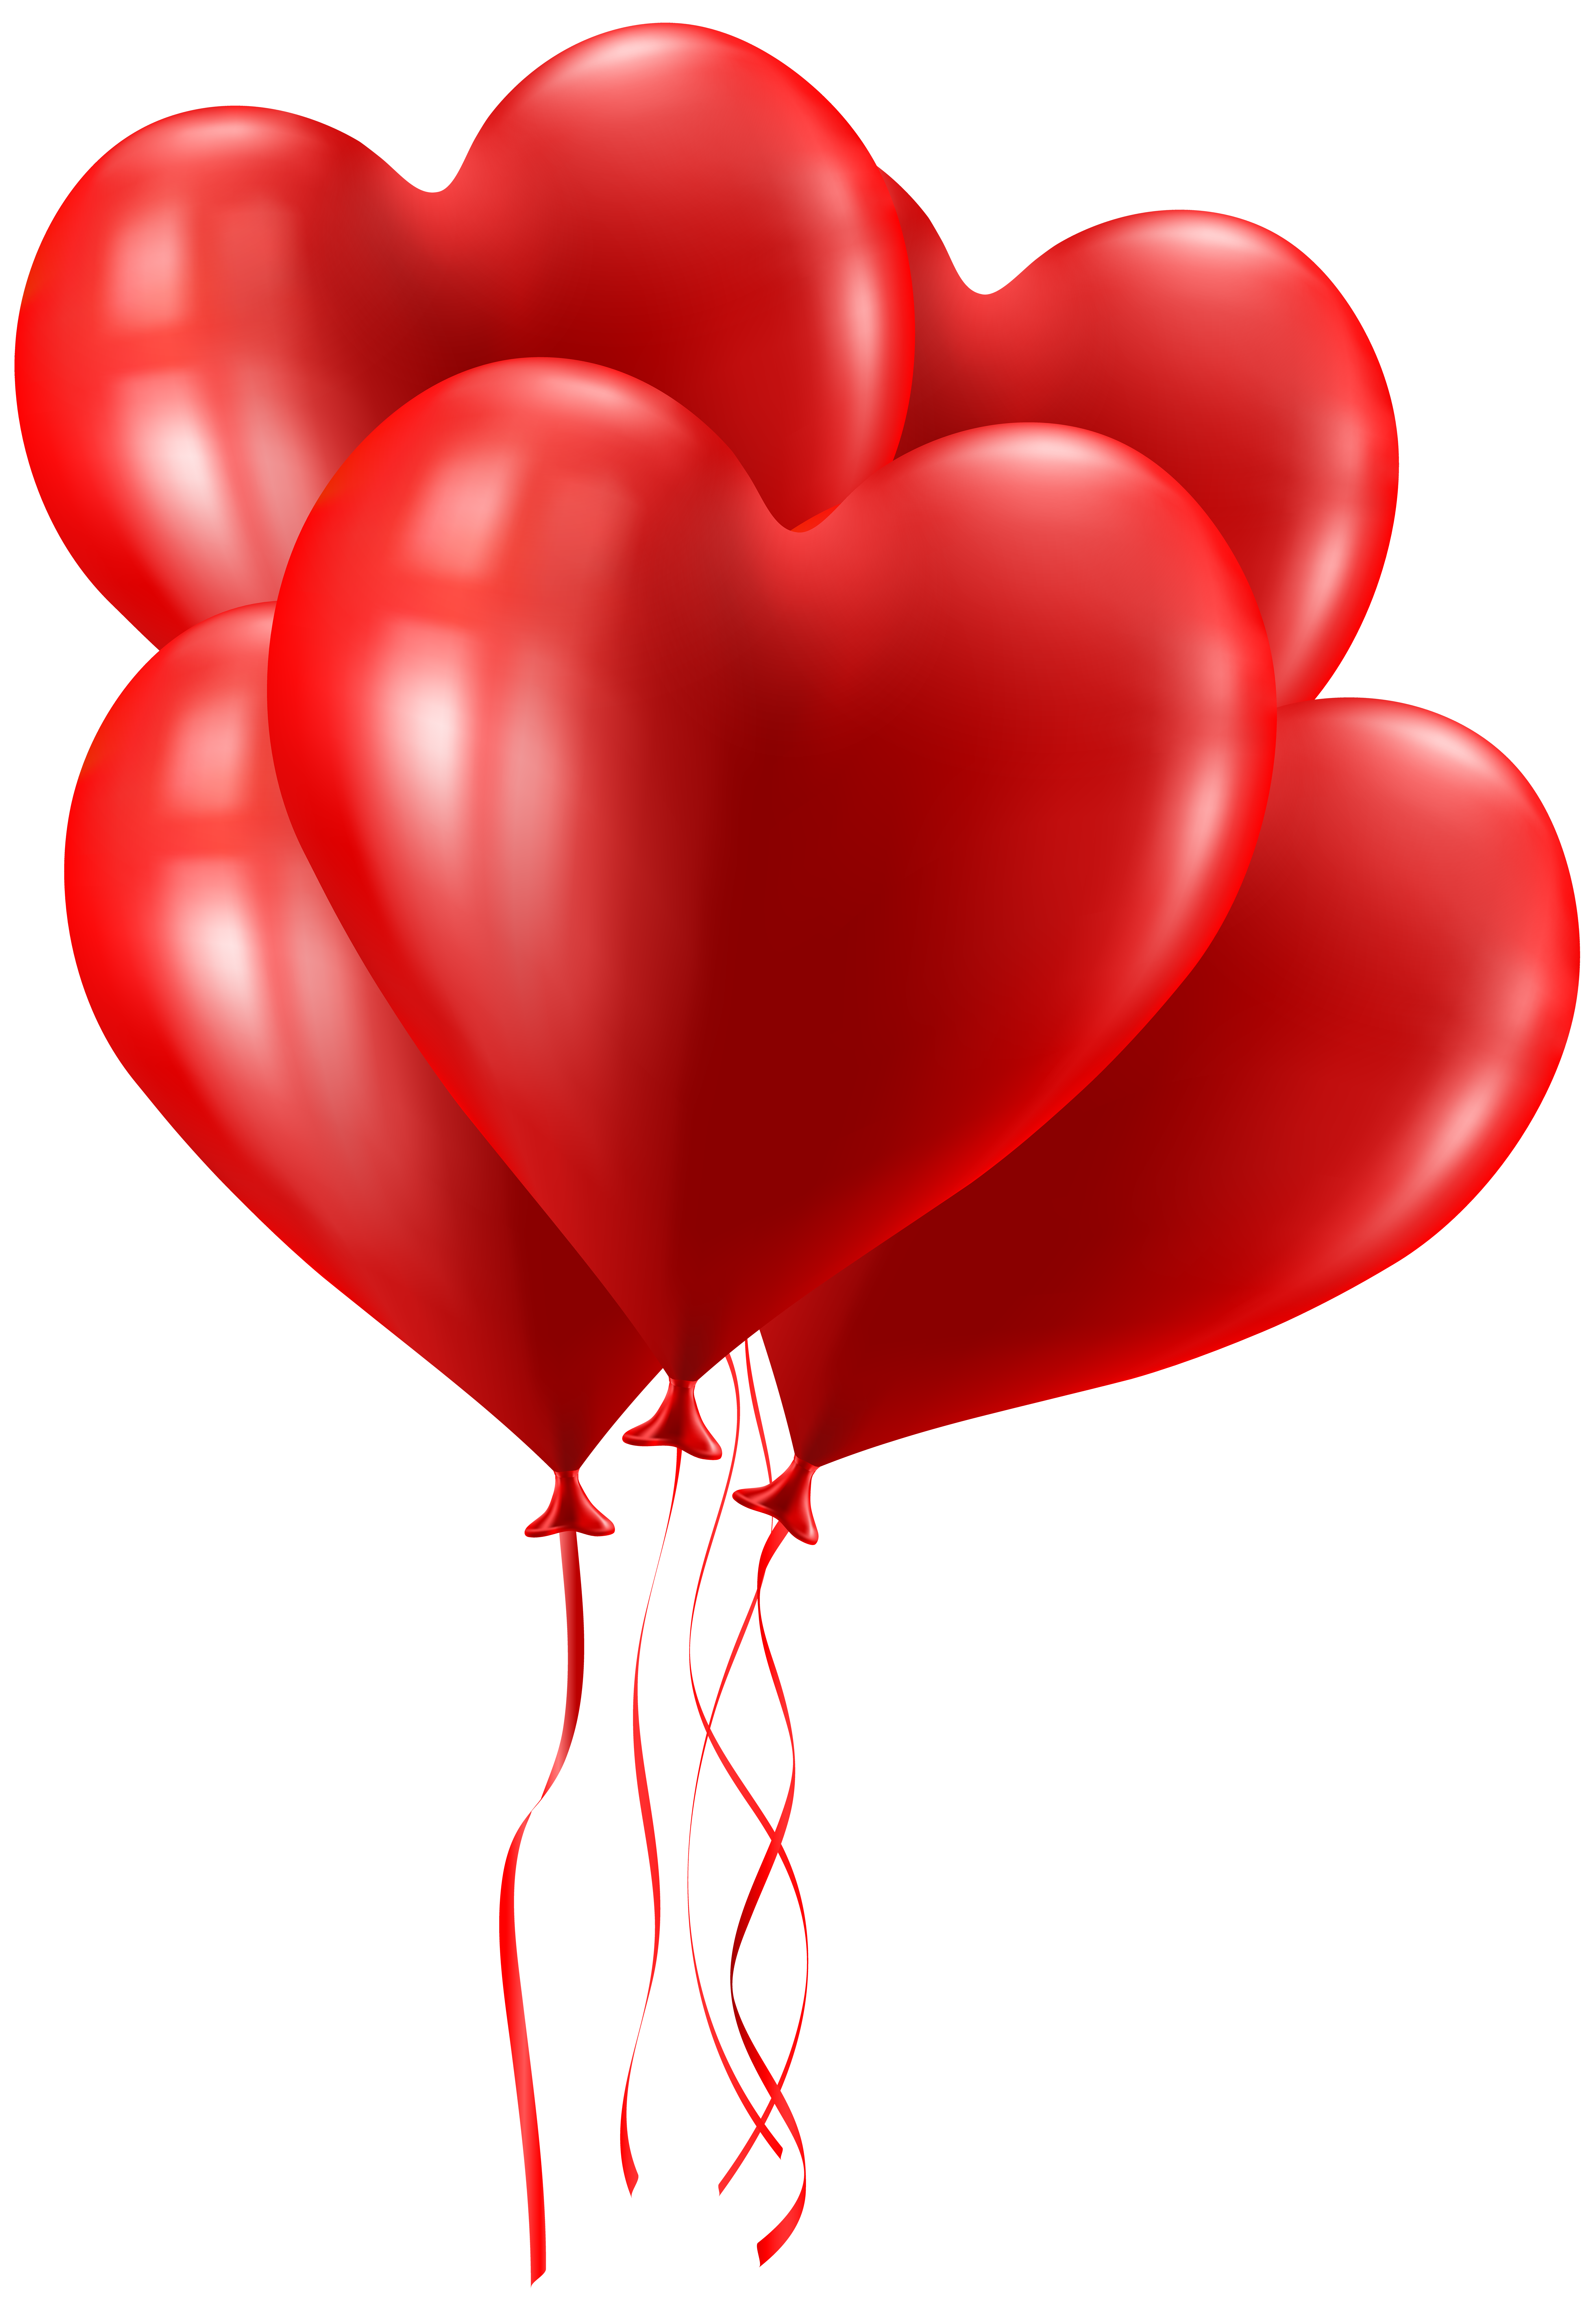 Valentine's Day Heart Balloons Clip Art Image | Gallery ...